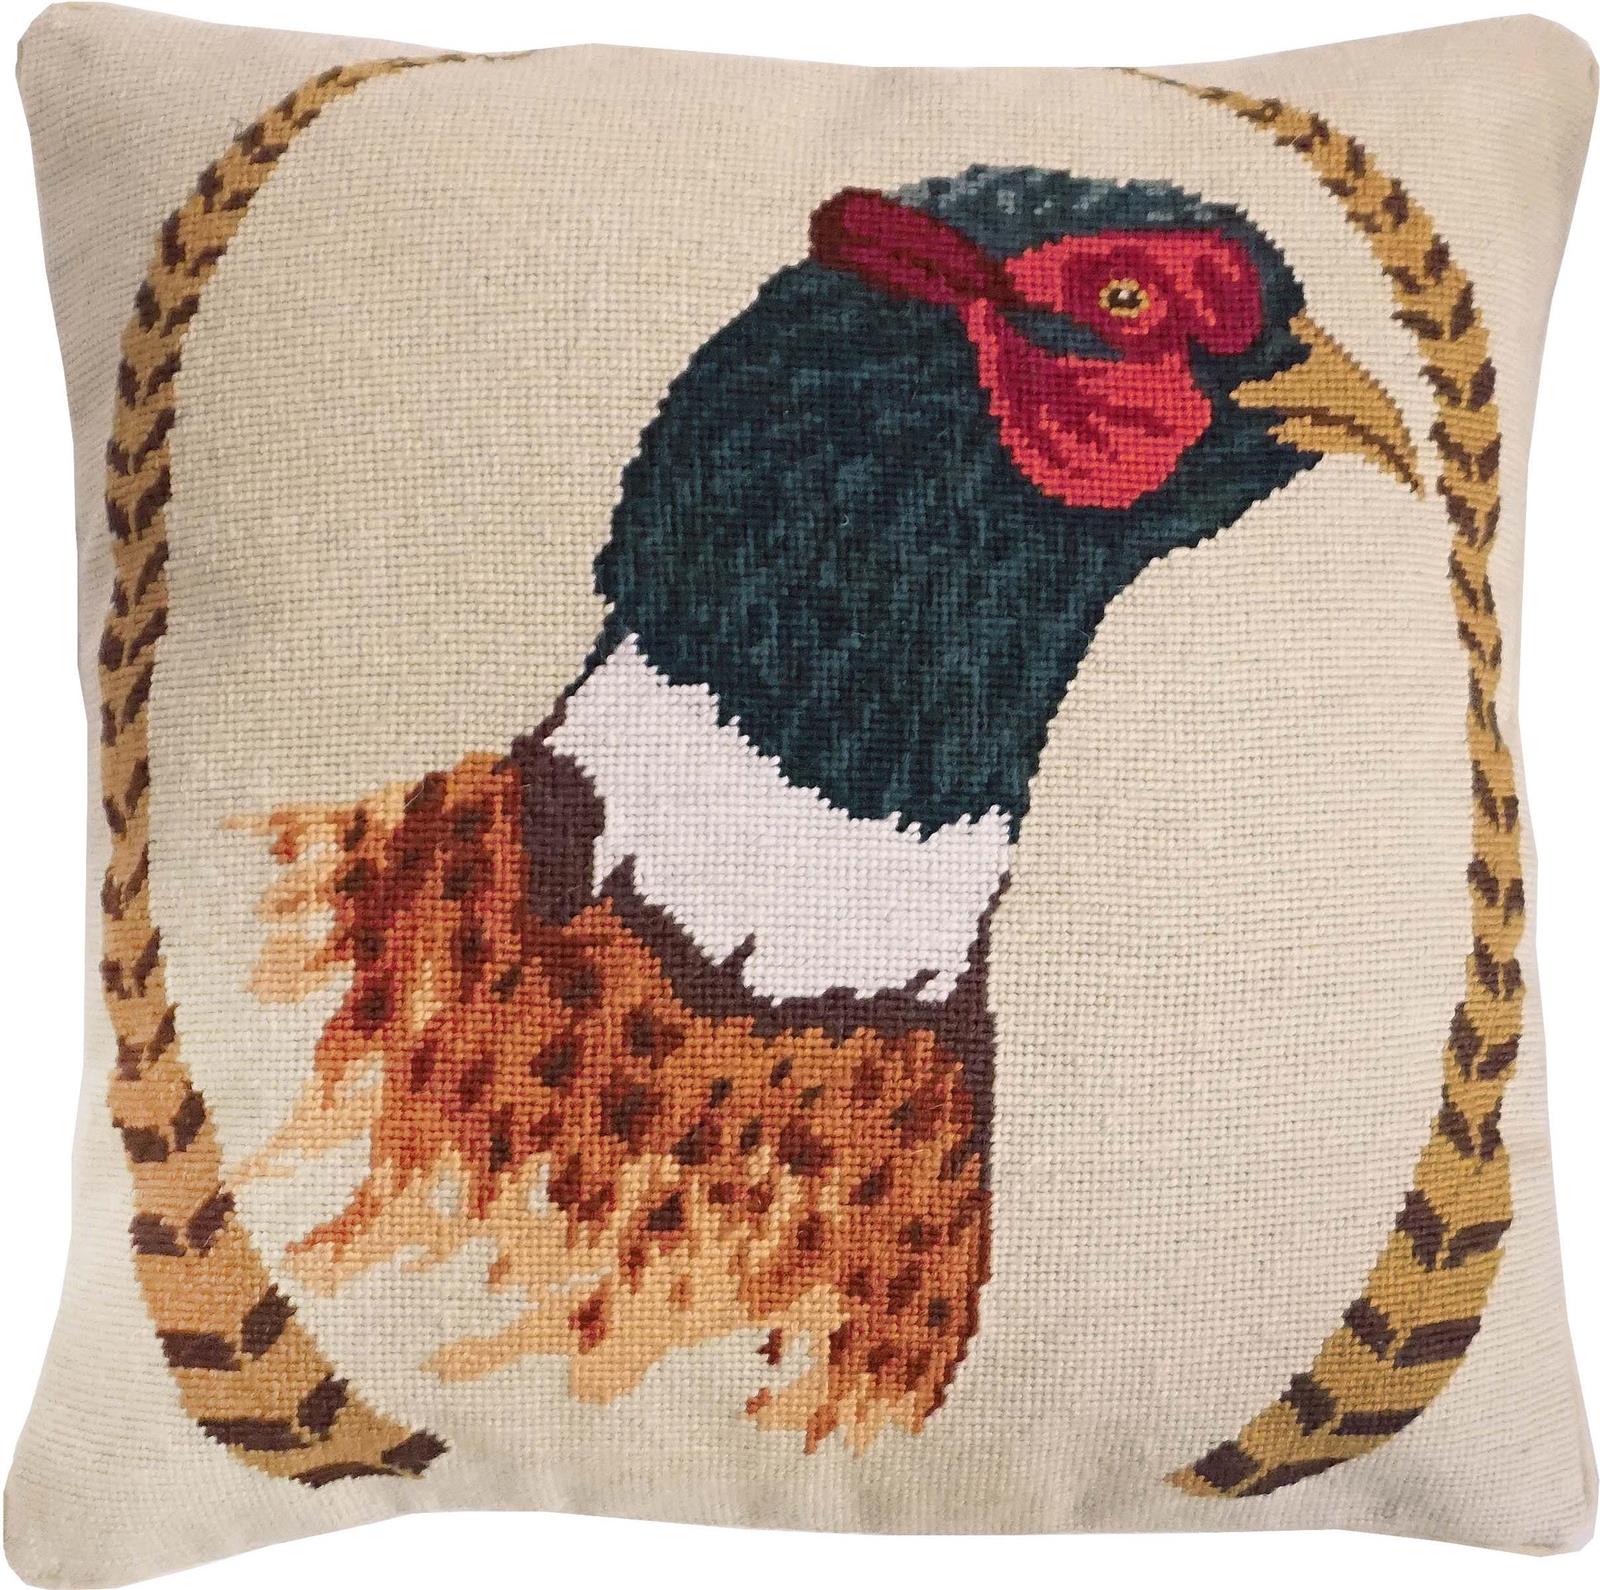 Throw Pillow Needlepoint Pheasant and Feathers 18x18 Beige Back Cotton Velvet-Image 1